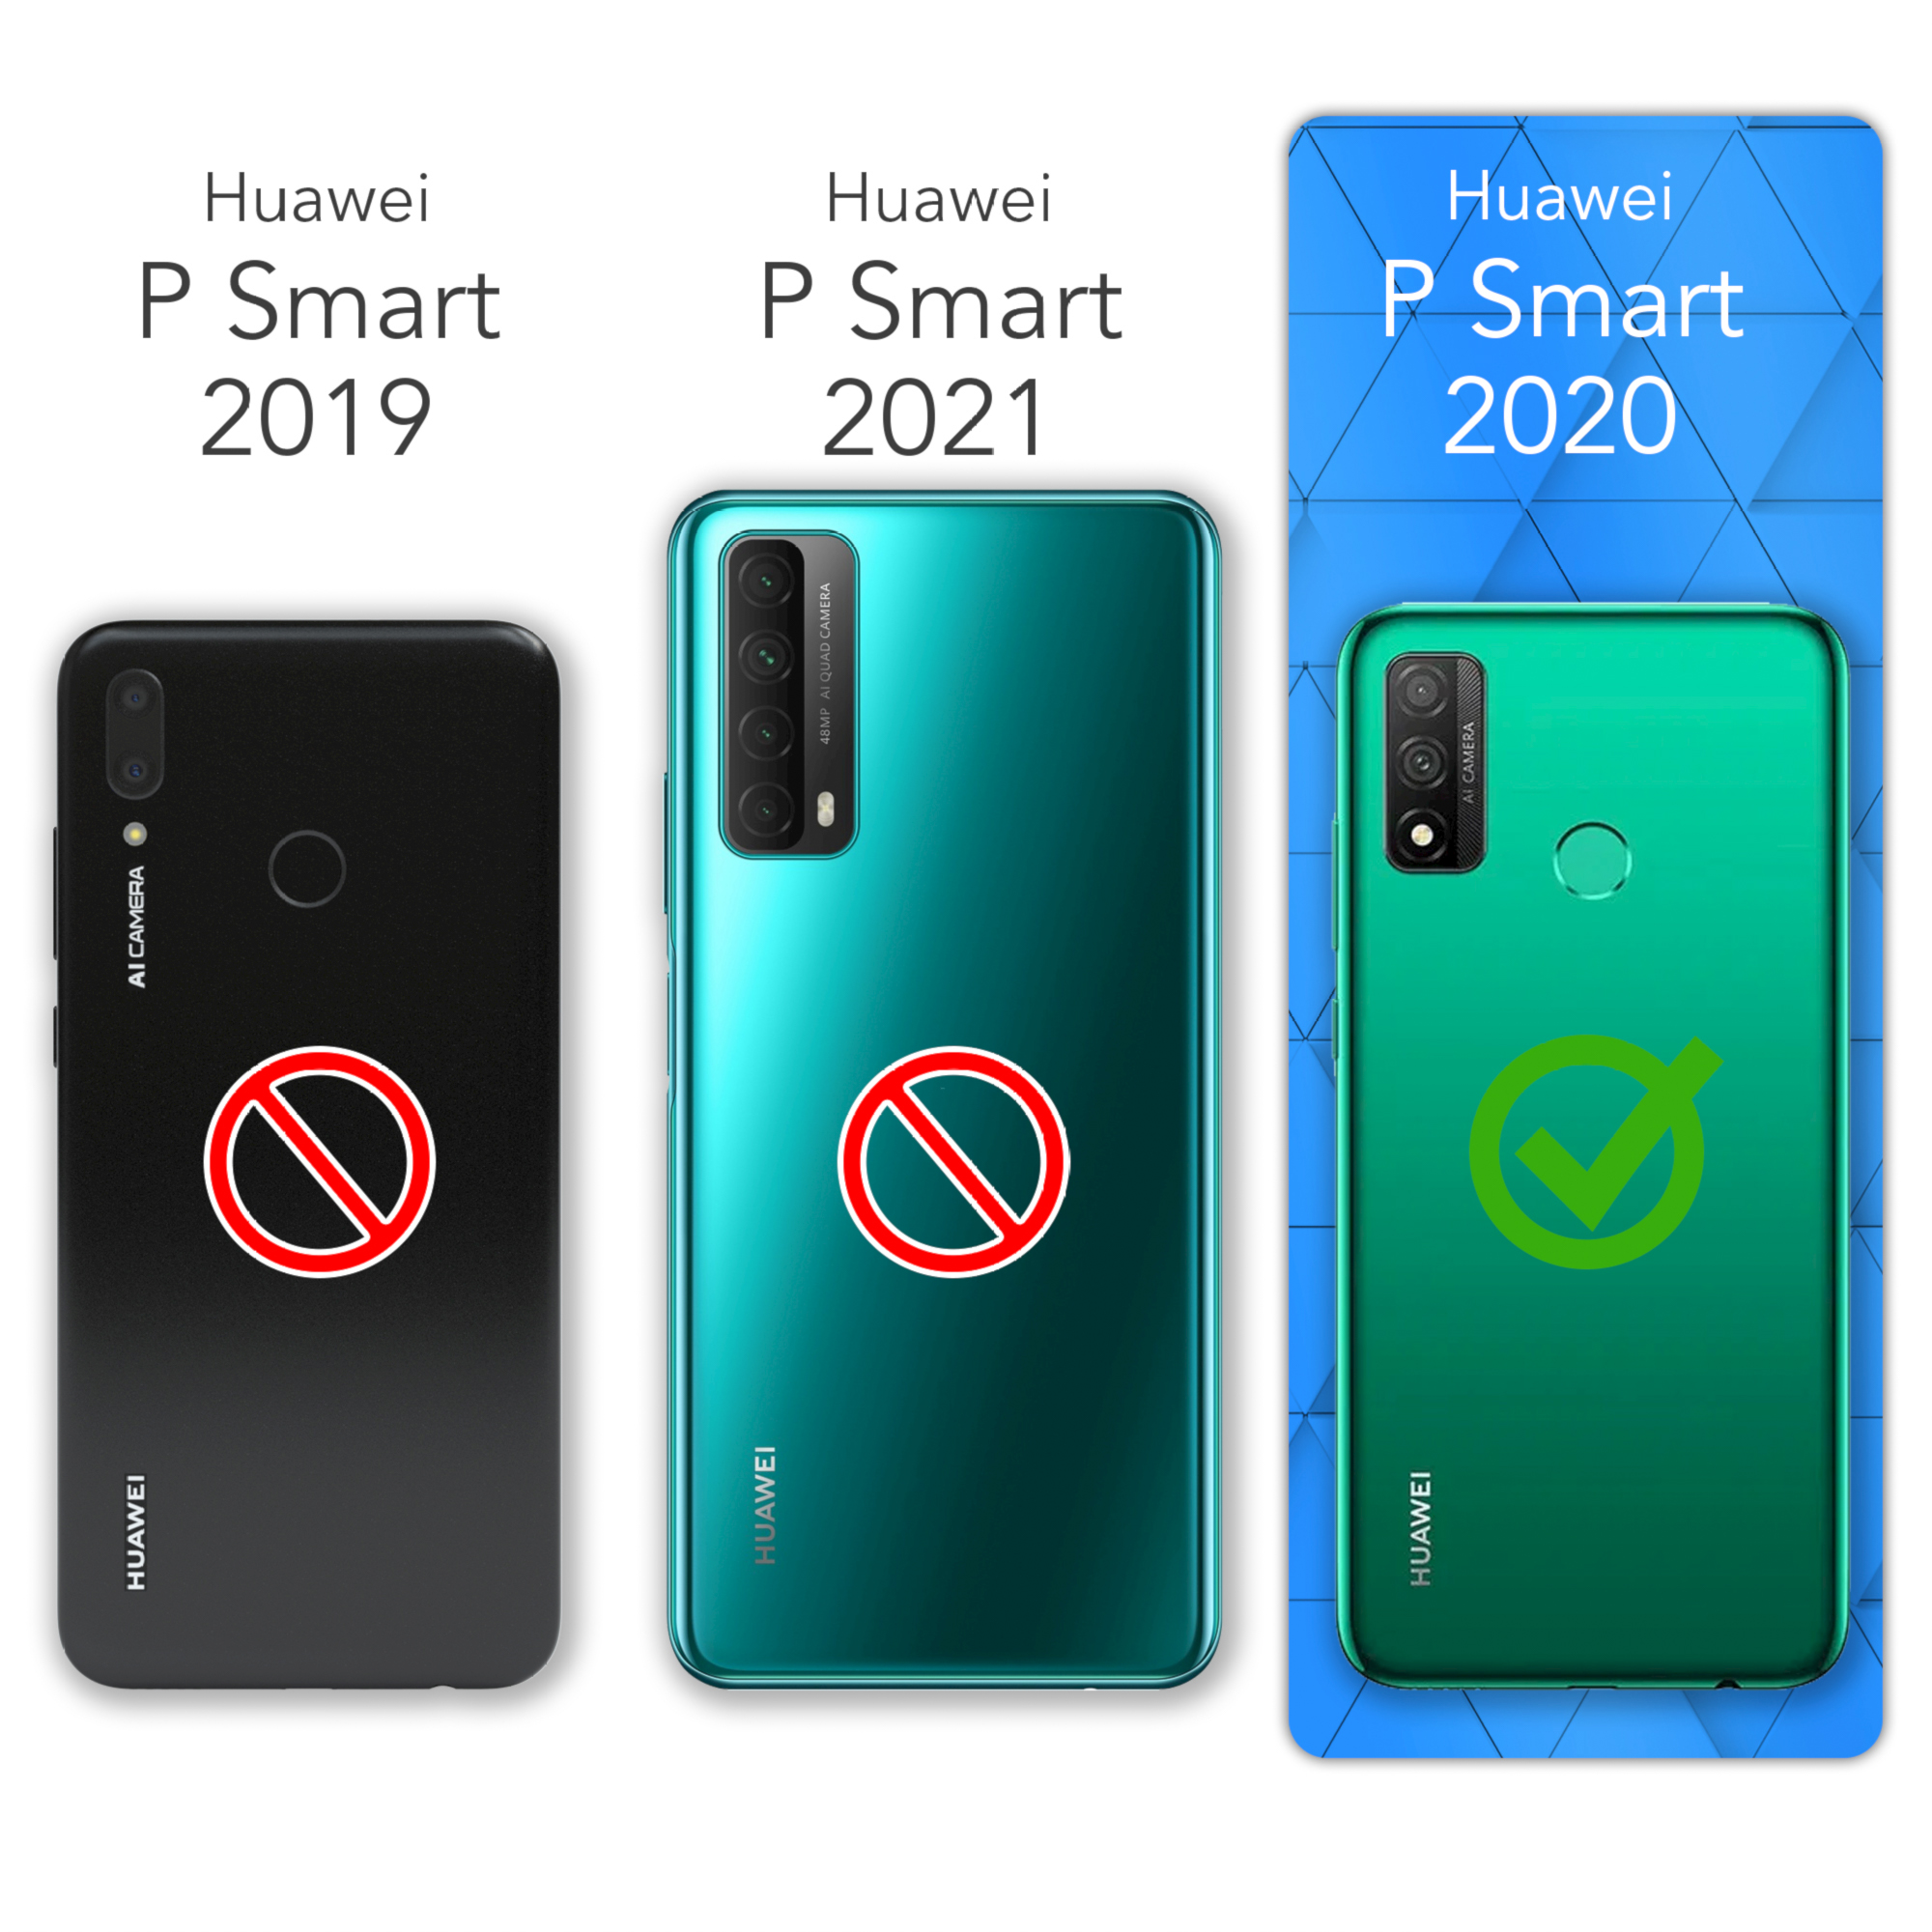 / EAZY Silikon Rot Huawei, Backcover, CASE Beere (2020), P Handycase, Premium Smart